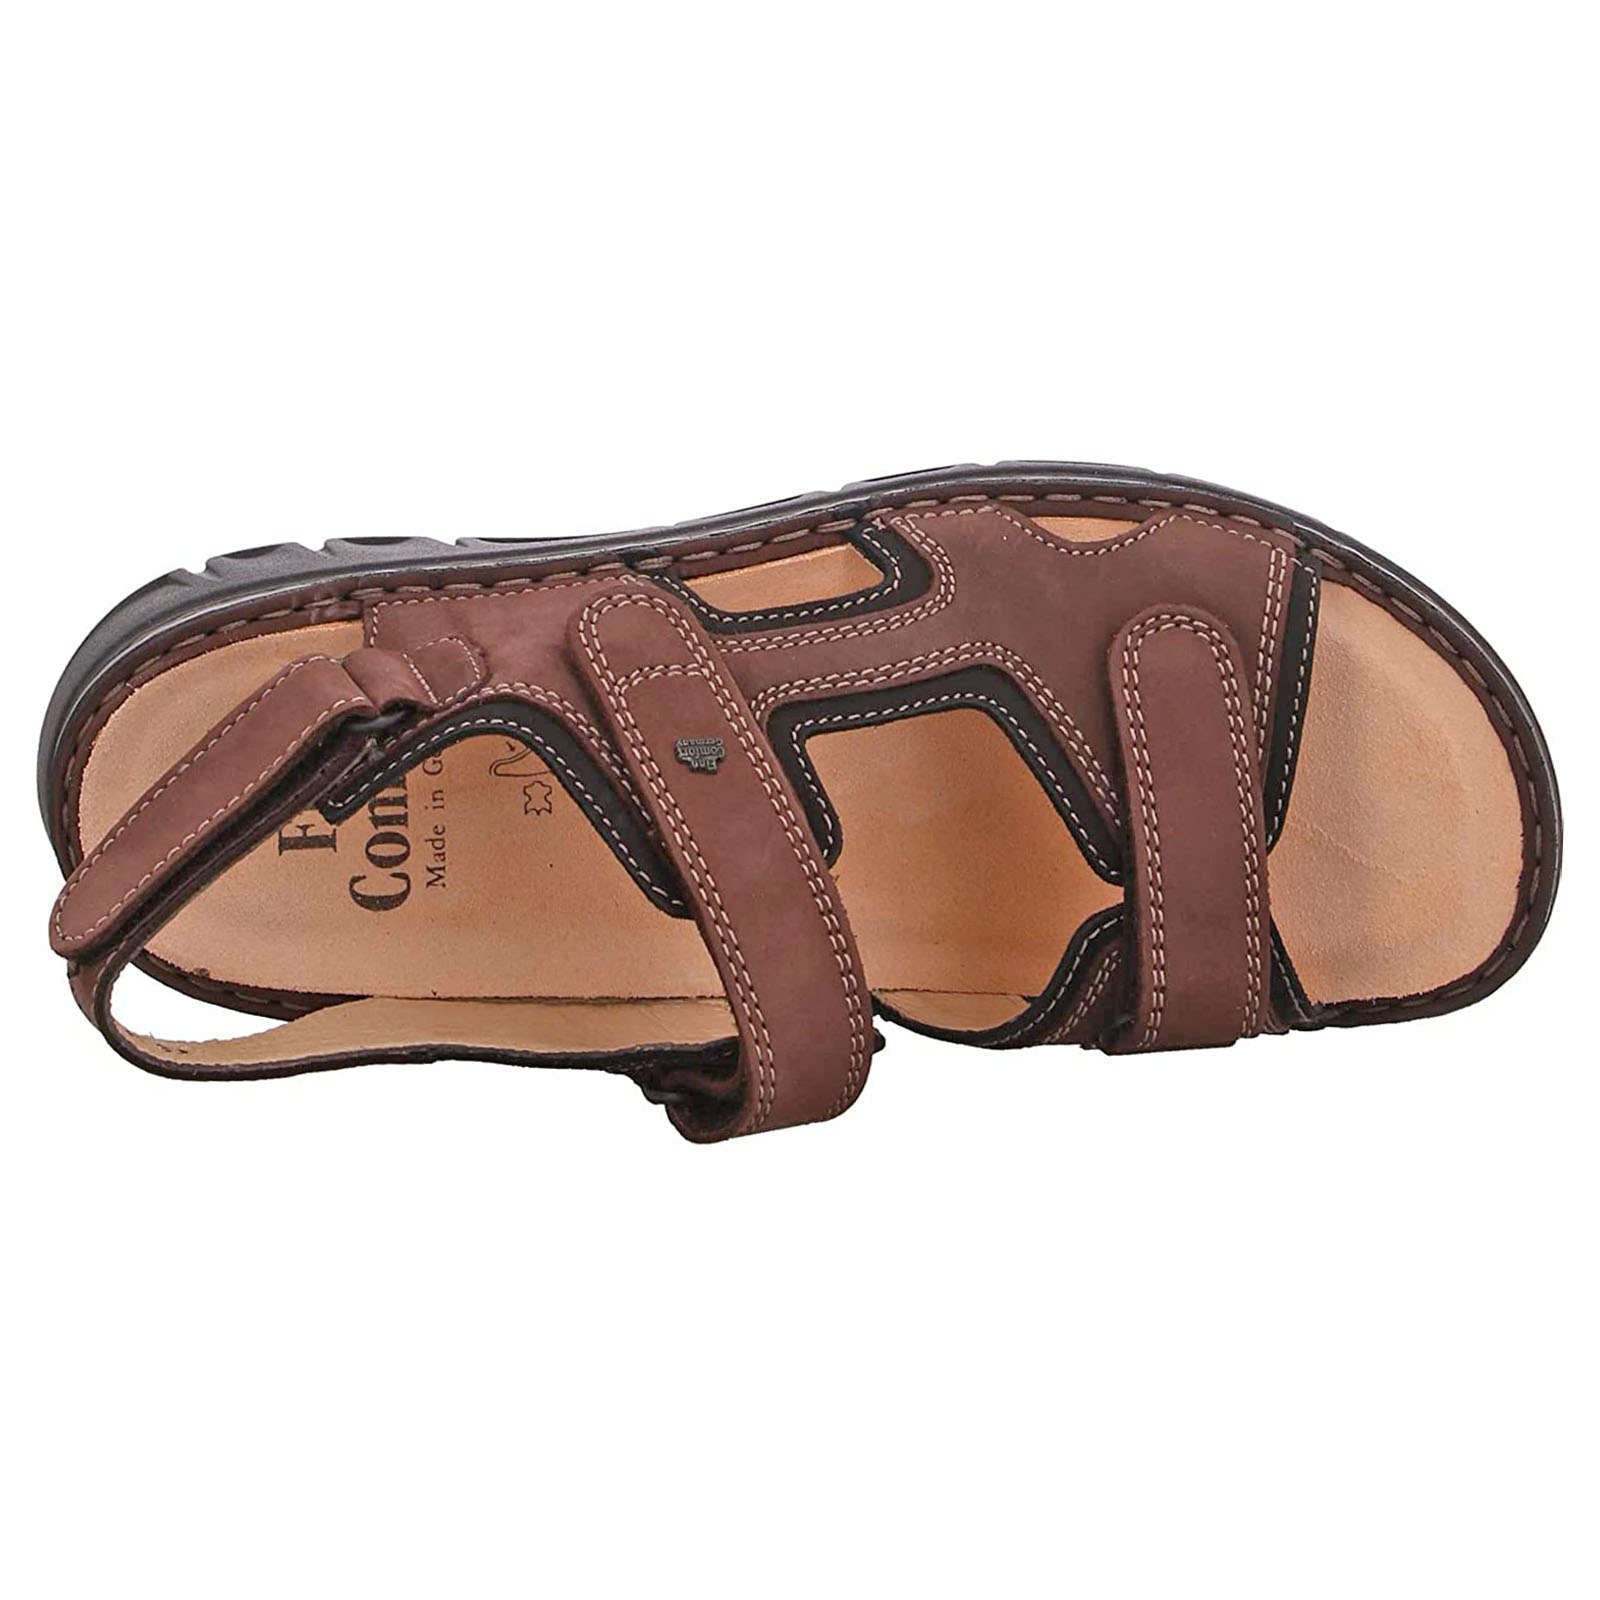 Finn Comfort Wanaka-S Nubuck Leather Unisex Sandals#color_grizzly black